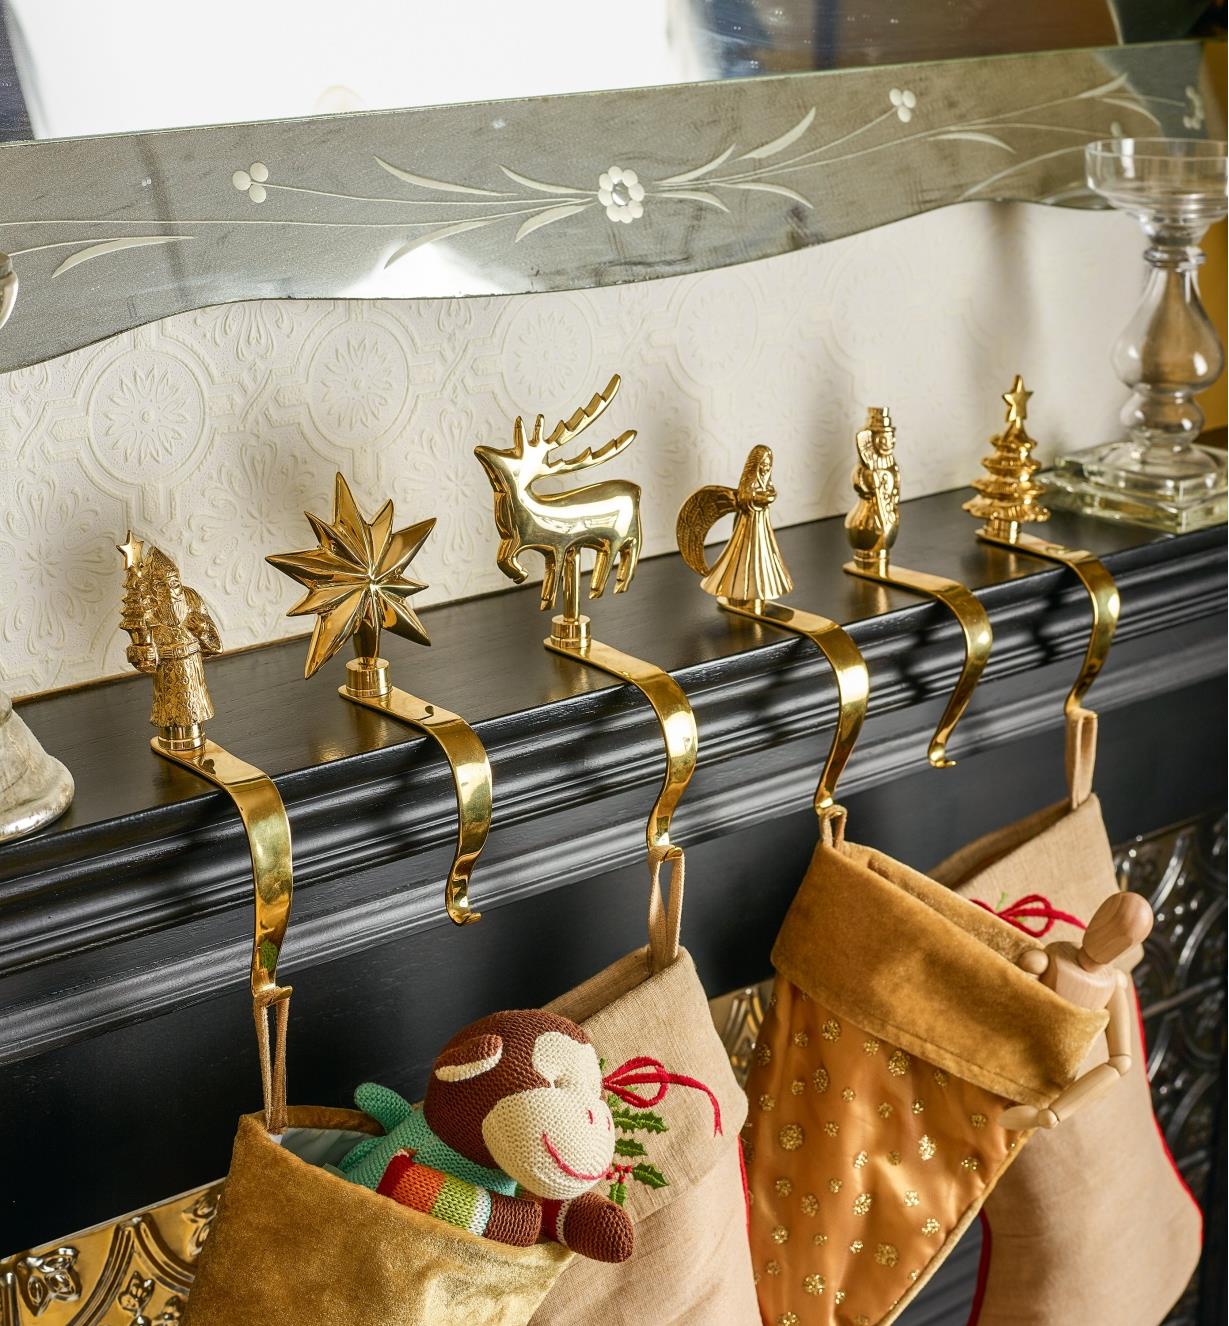 Set of 6 Brass Hangers holding stockings on a mantel